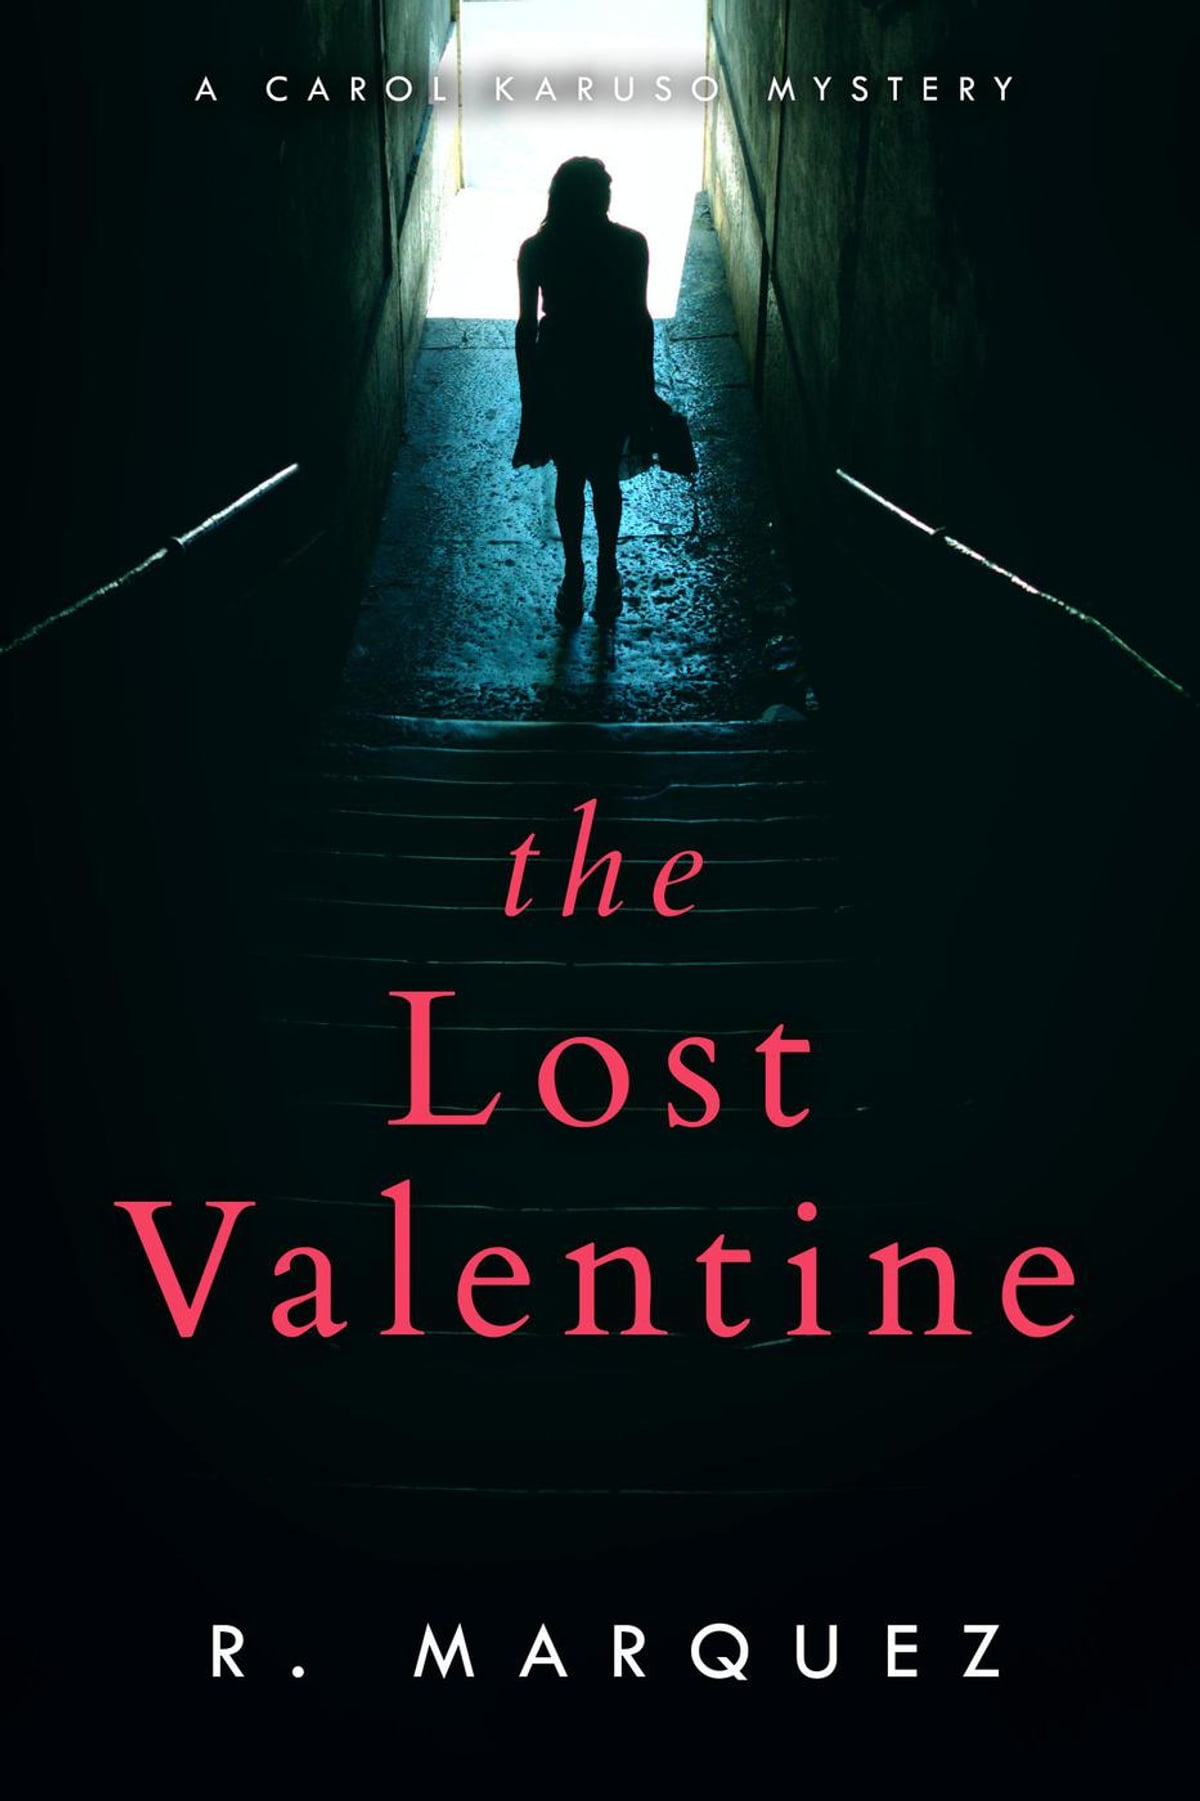 The Lost Valentine eBook by R. Marquez - EPUB Book